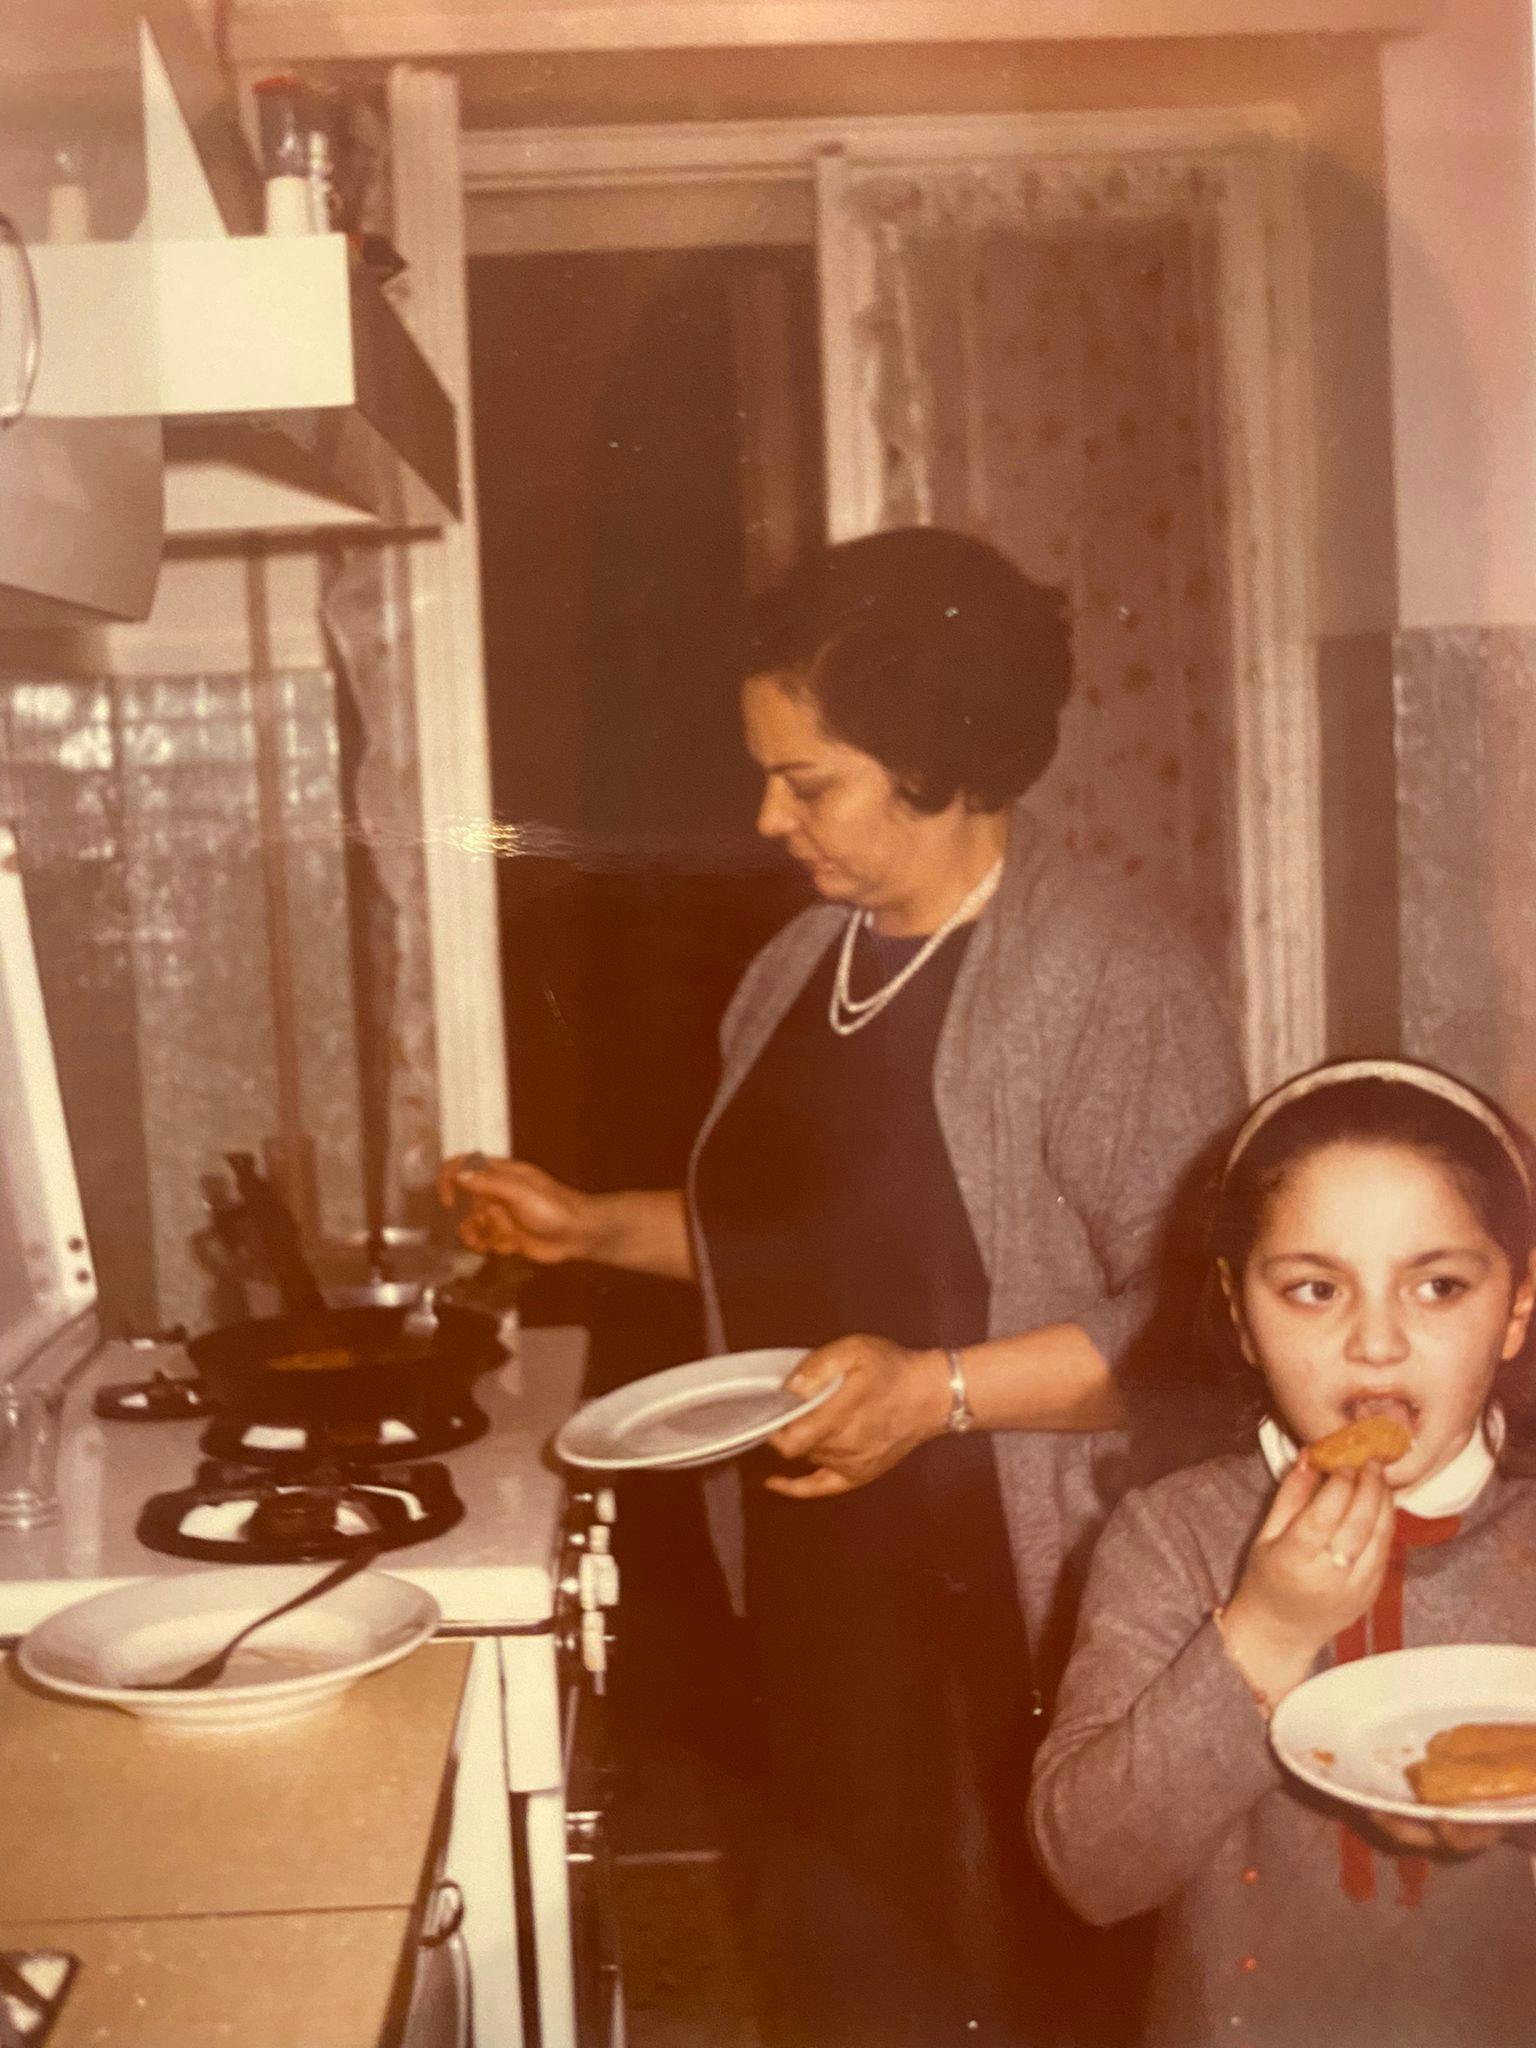 Sara's Nonna Lisa with Sara's mother, Marina cooking in the kitchen, 1967.